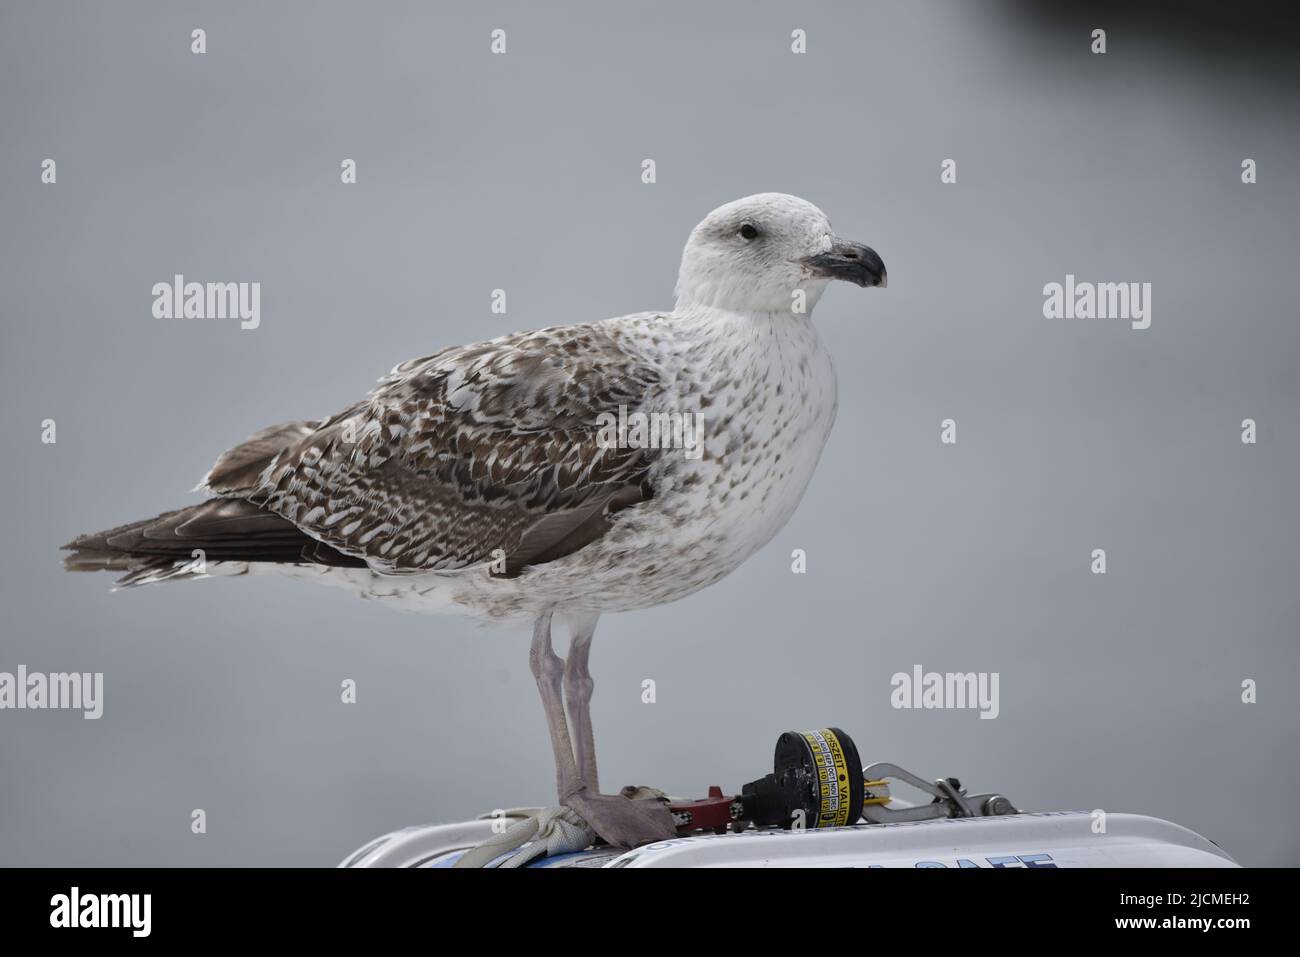 Close-Up Image of a Juvenile European Herring Gull (Larus argentatus) in Right-Profile Against a Plain Grey Background in Peel, Isle of Man in May, UK Stock Photo